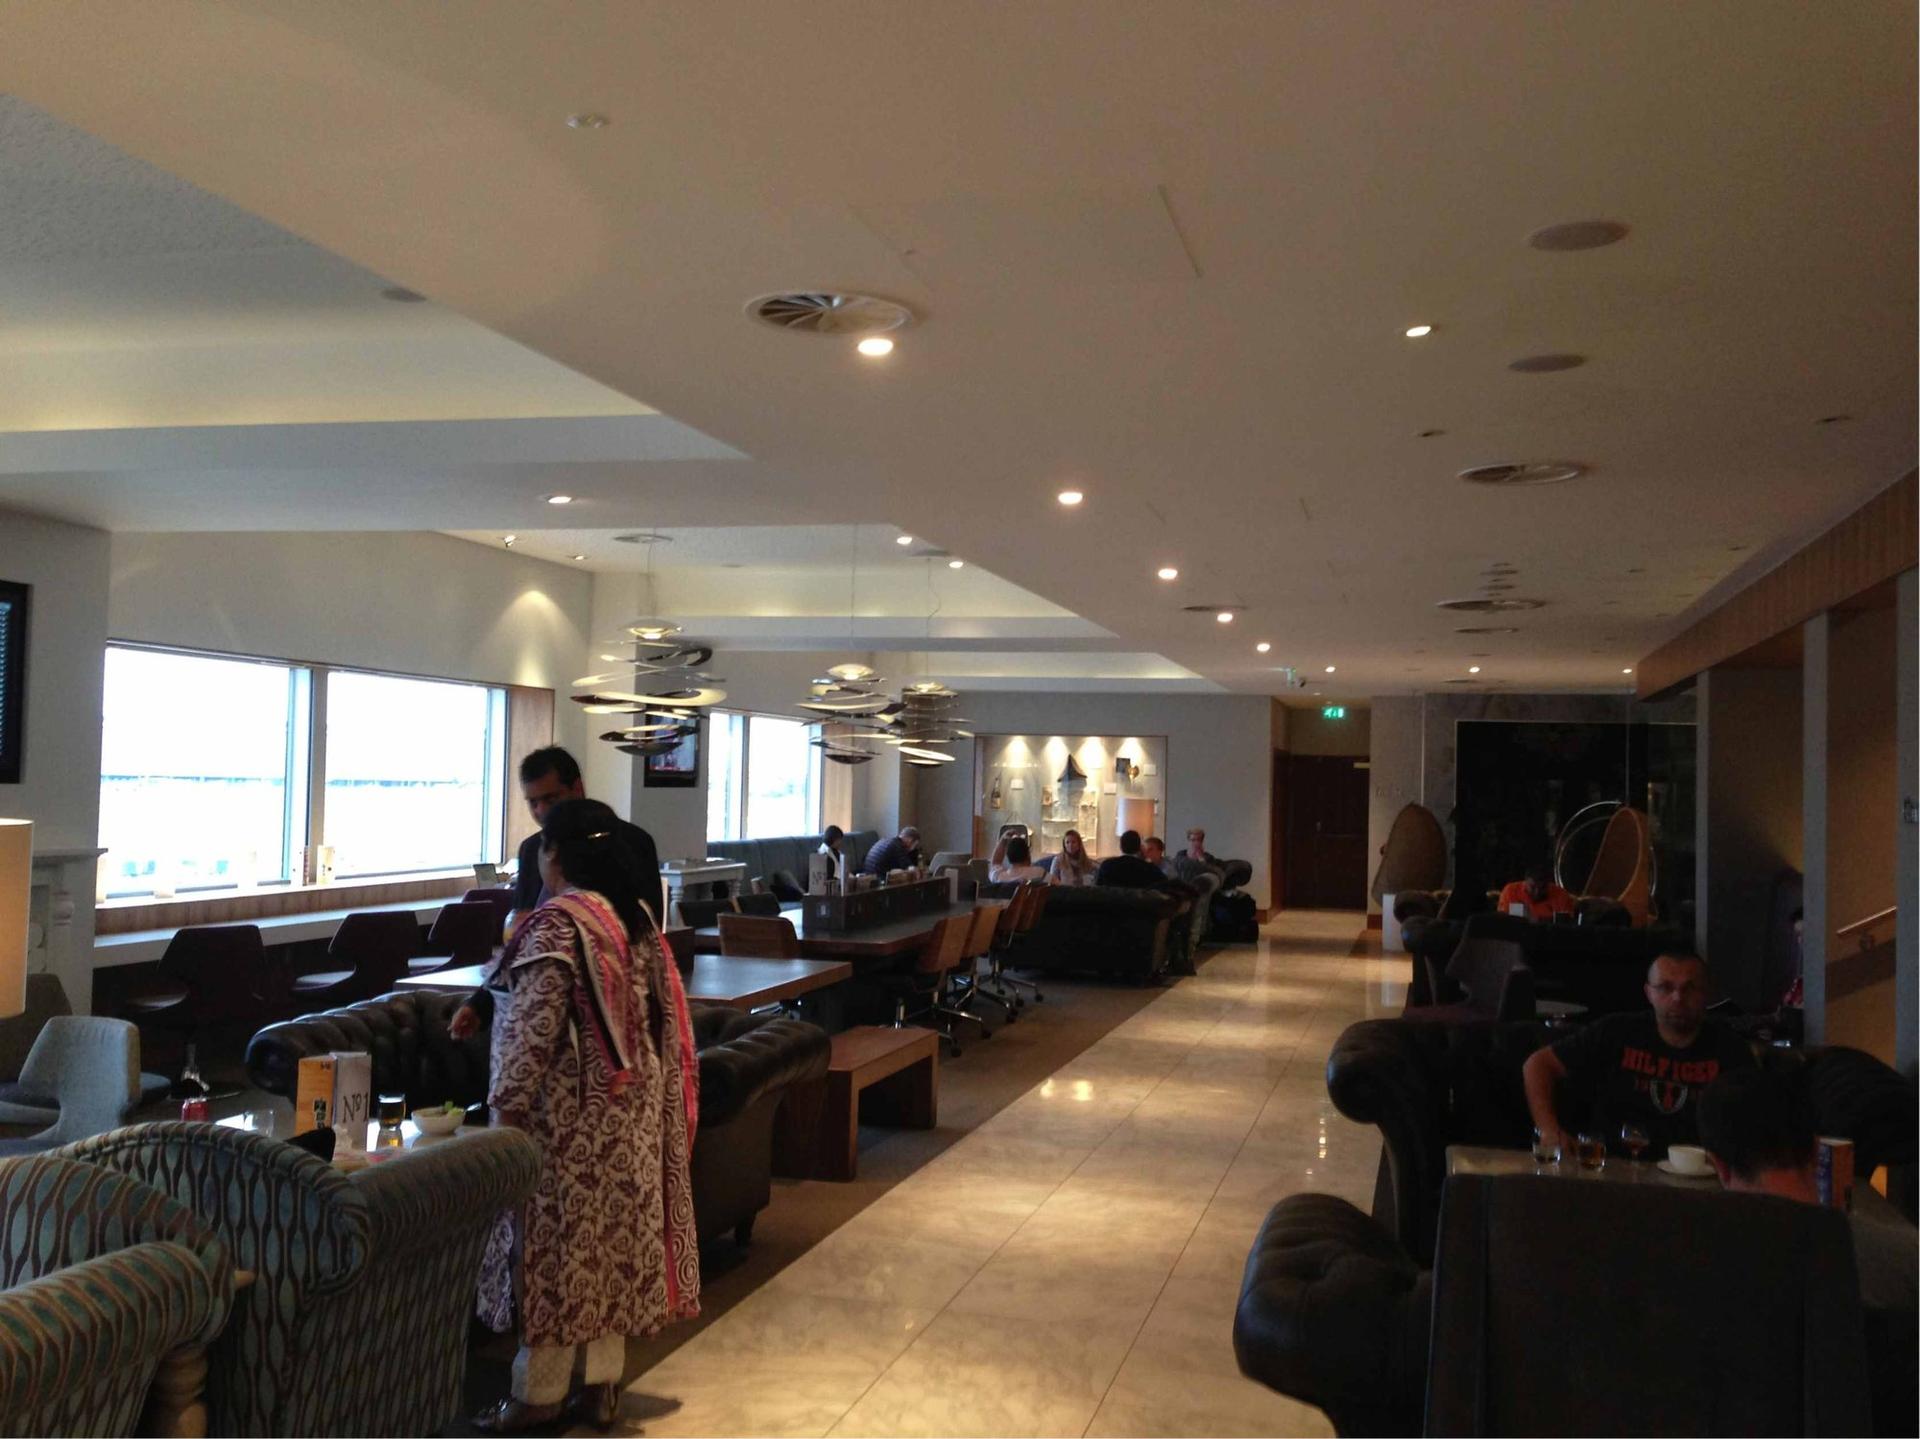 No1 Lounges, Heathrow Terminal 3 image 20 of 33